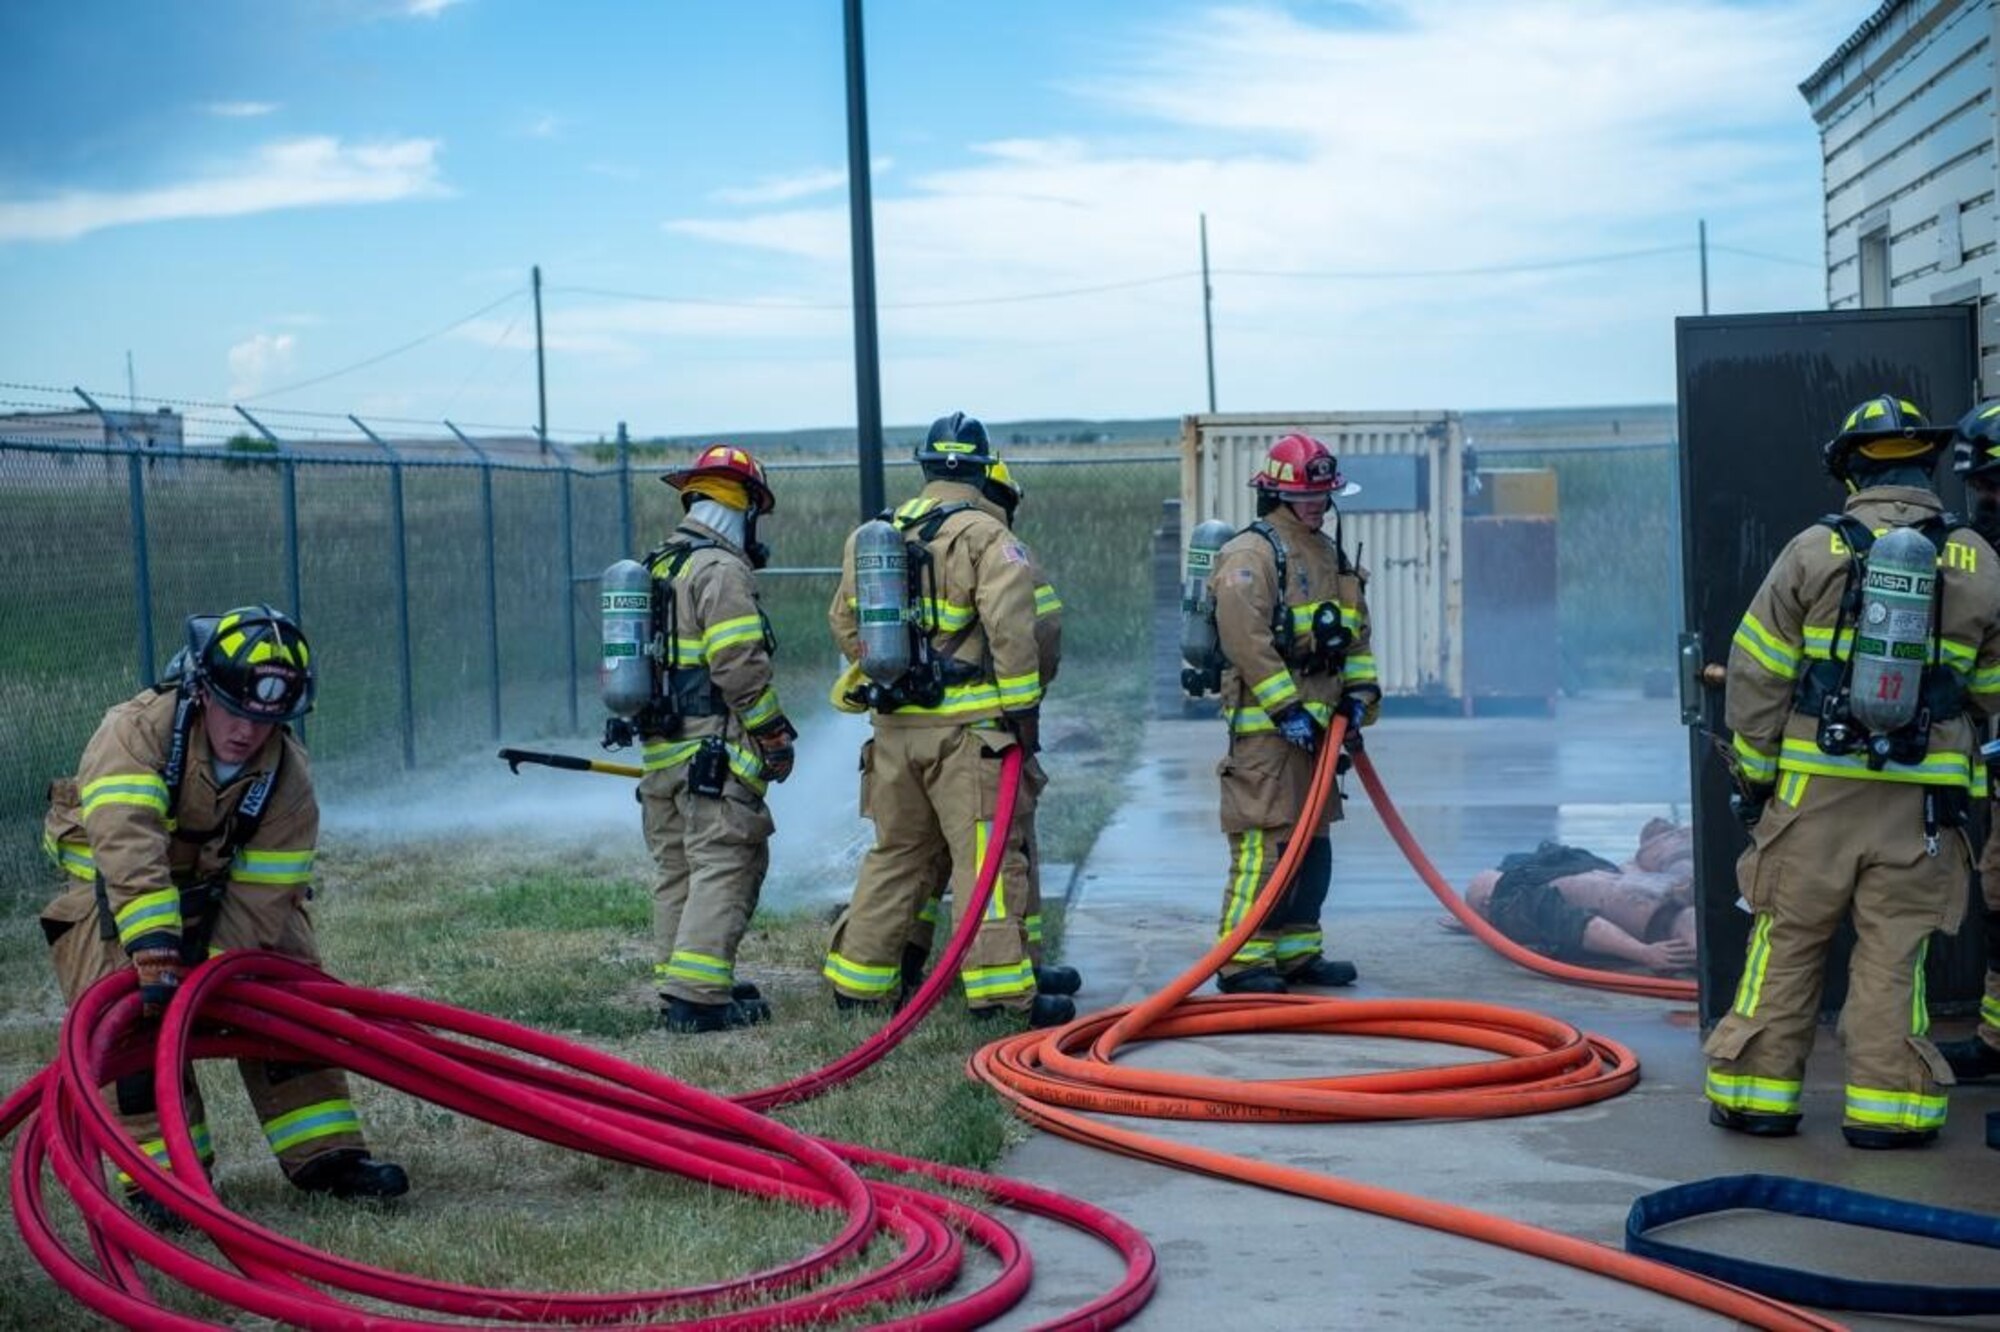 Personnel with the 28th Civil Engineering Squadron Fire Fighting Unit stage fire hoses for use in an exercise on Ellsworth Air Force Base, S.D., July 13, 2022.